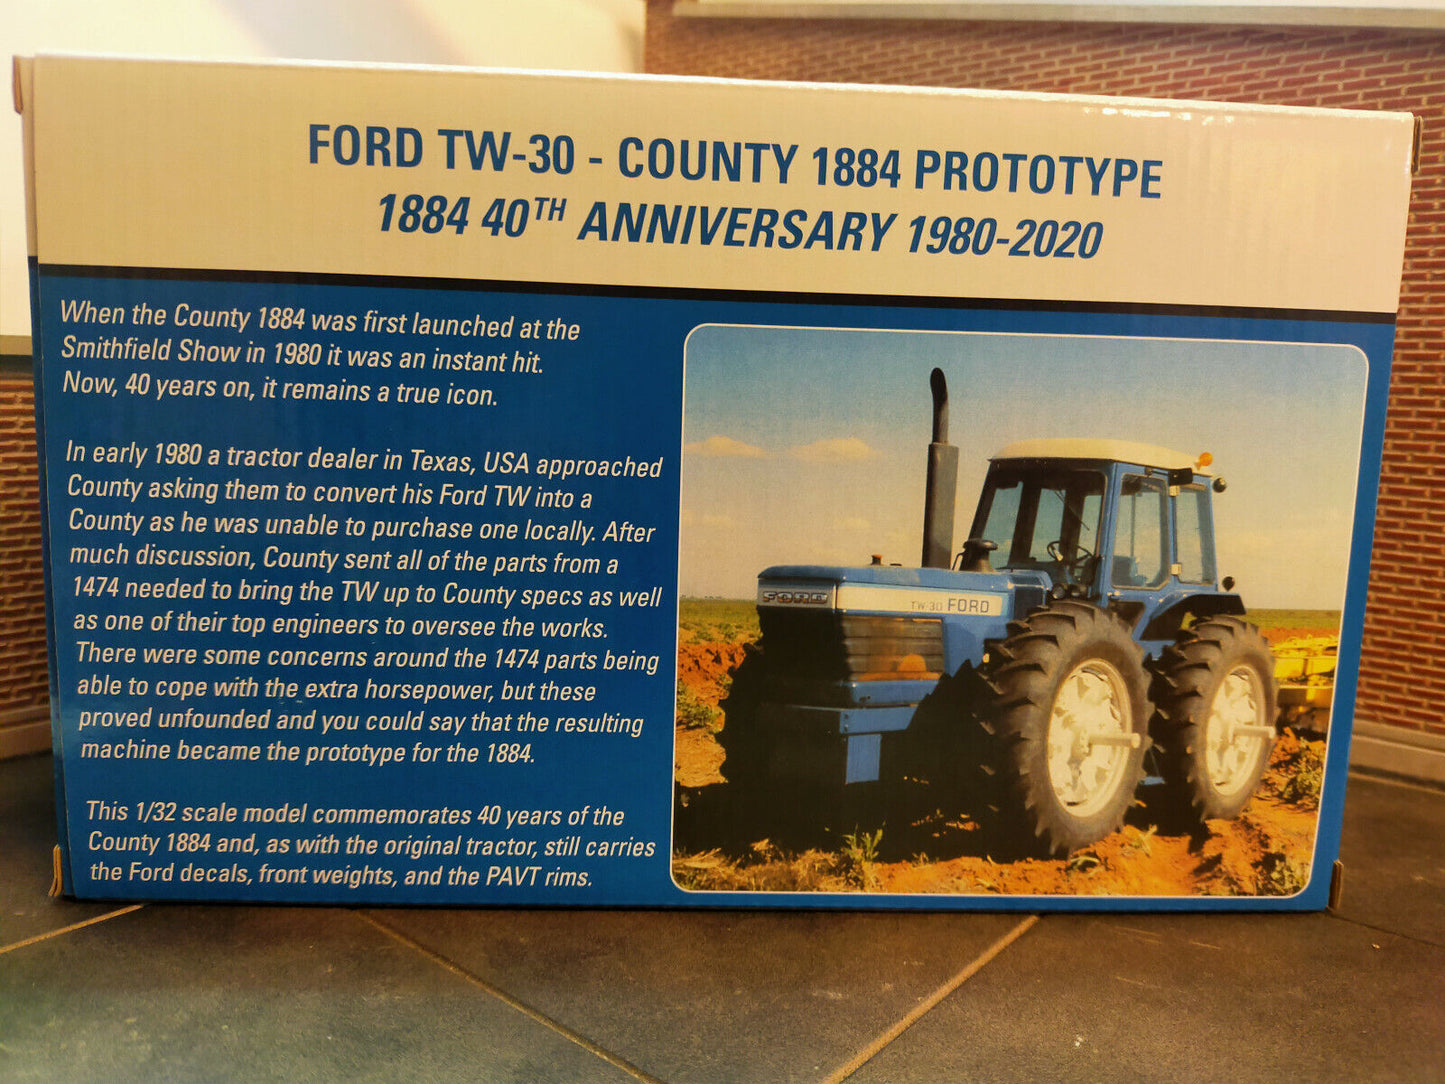 Ford TW-30 County 1884 Prototype 40th Anniversary Officially Licenced Universal Hobbies UH6302 1:32